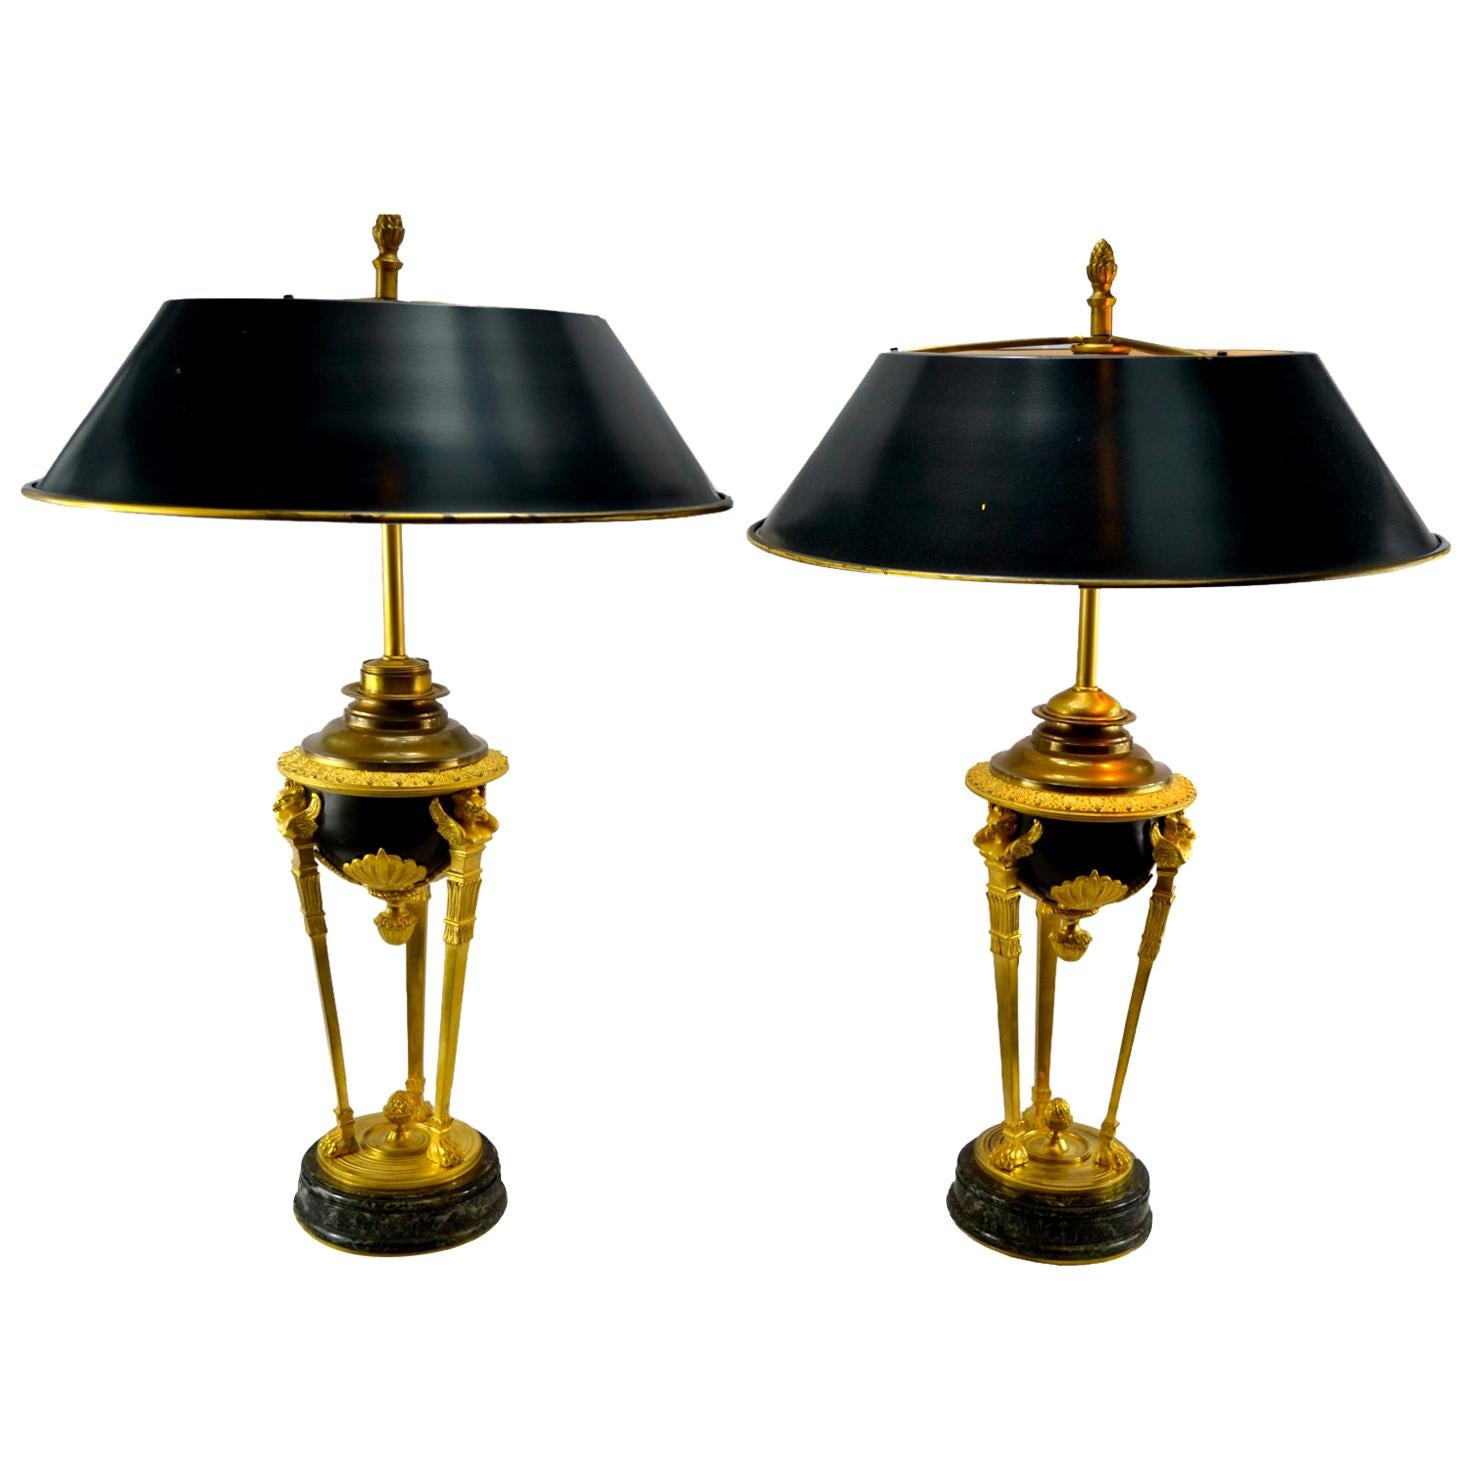 Pair of 19th Century Gilt and Patinated Bronze Pompeian Empire Style Lamps